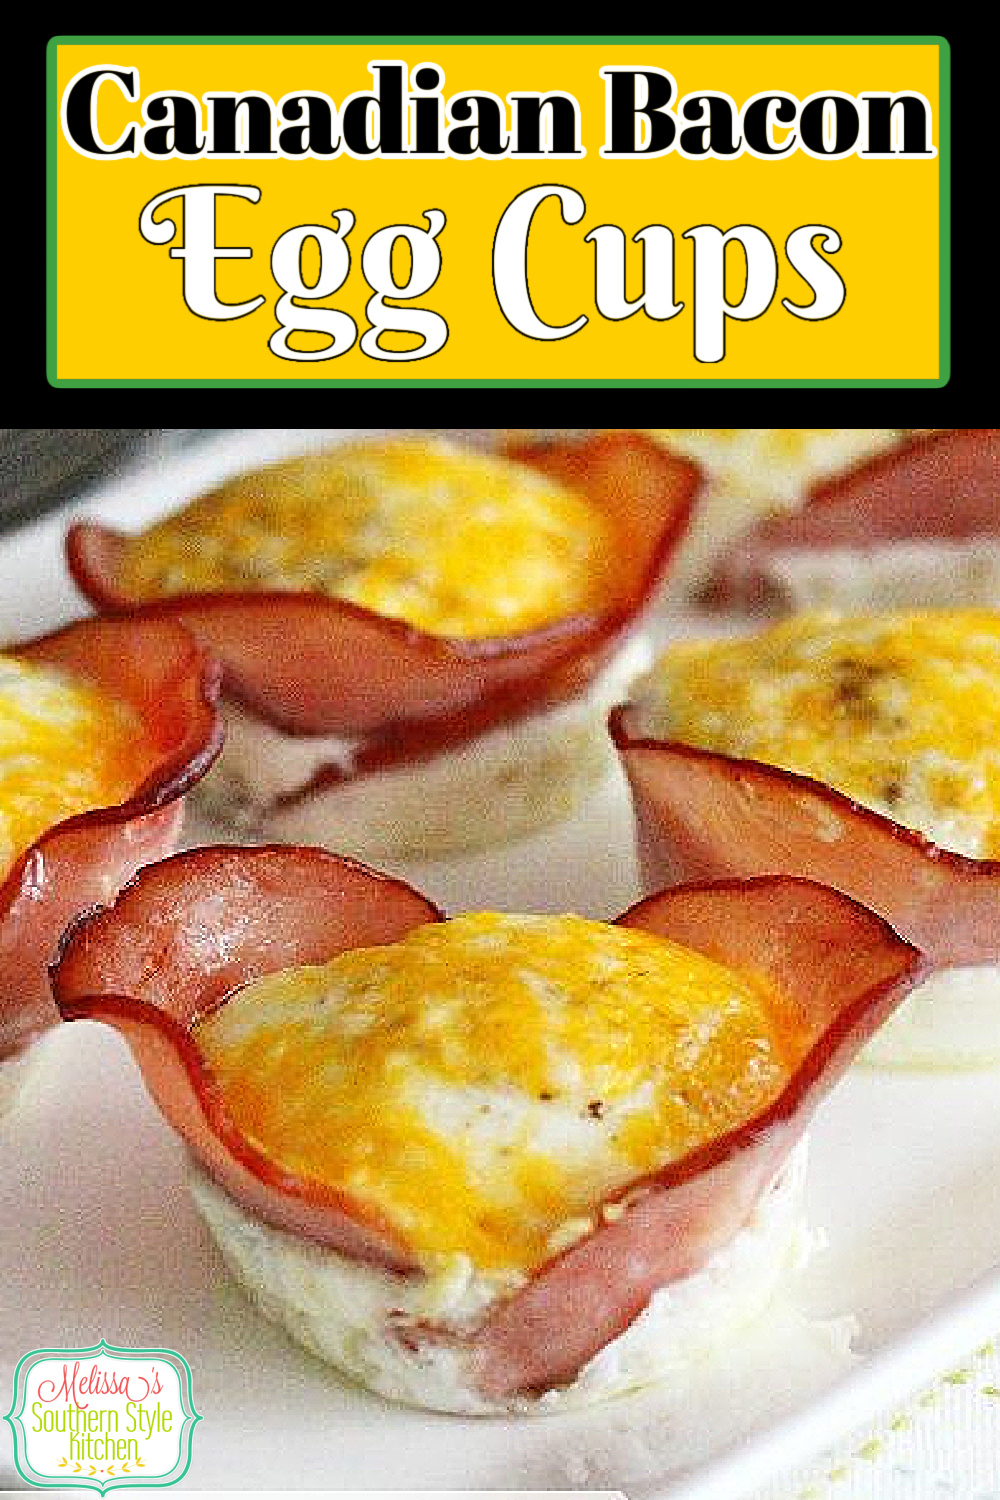 These delicious Canadian Bacon Egg Cups are simple to assemble and make a tasty start to your day #eggs #eggmuffins #eggcups #canadianbacon #bacon #brunch #breakfast #holidaybrunch #lowcarb #keto #ketoeggs #ham #muffintinmeals #southernrecipes #southernfood #melissassouthernstylekitchen via @melissasssk